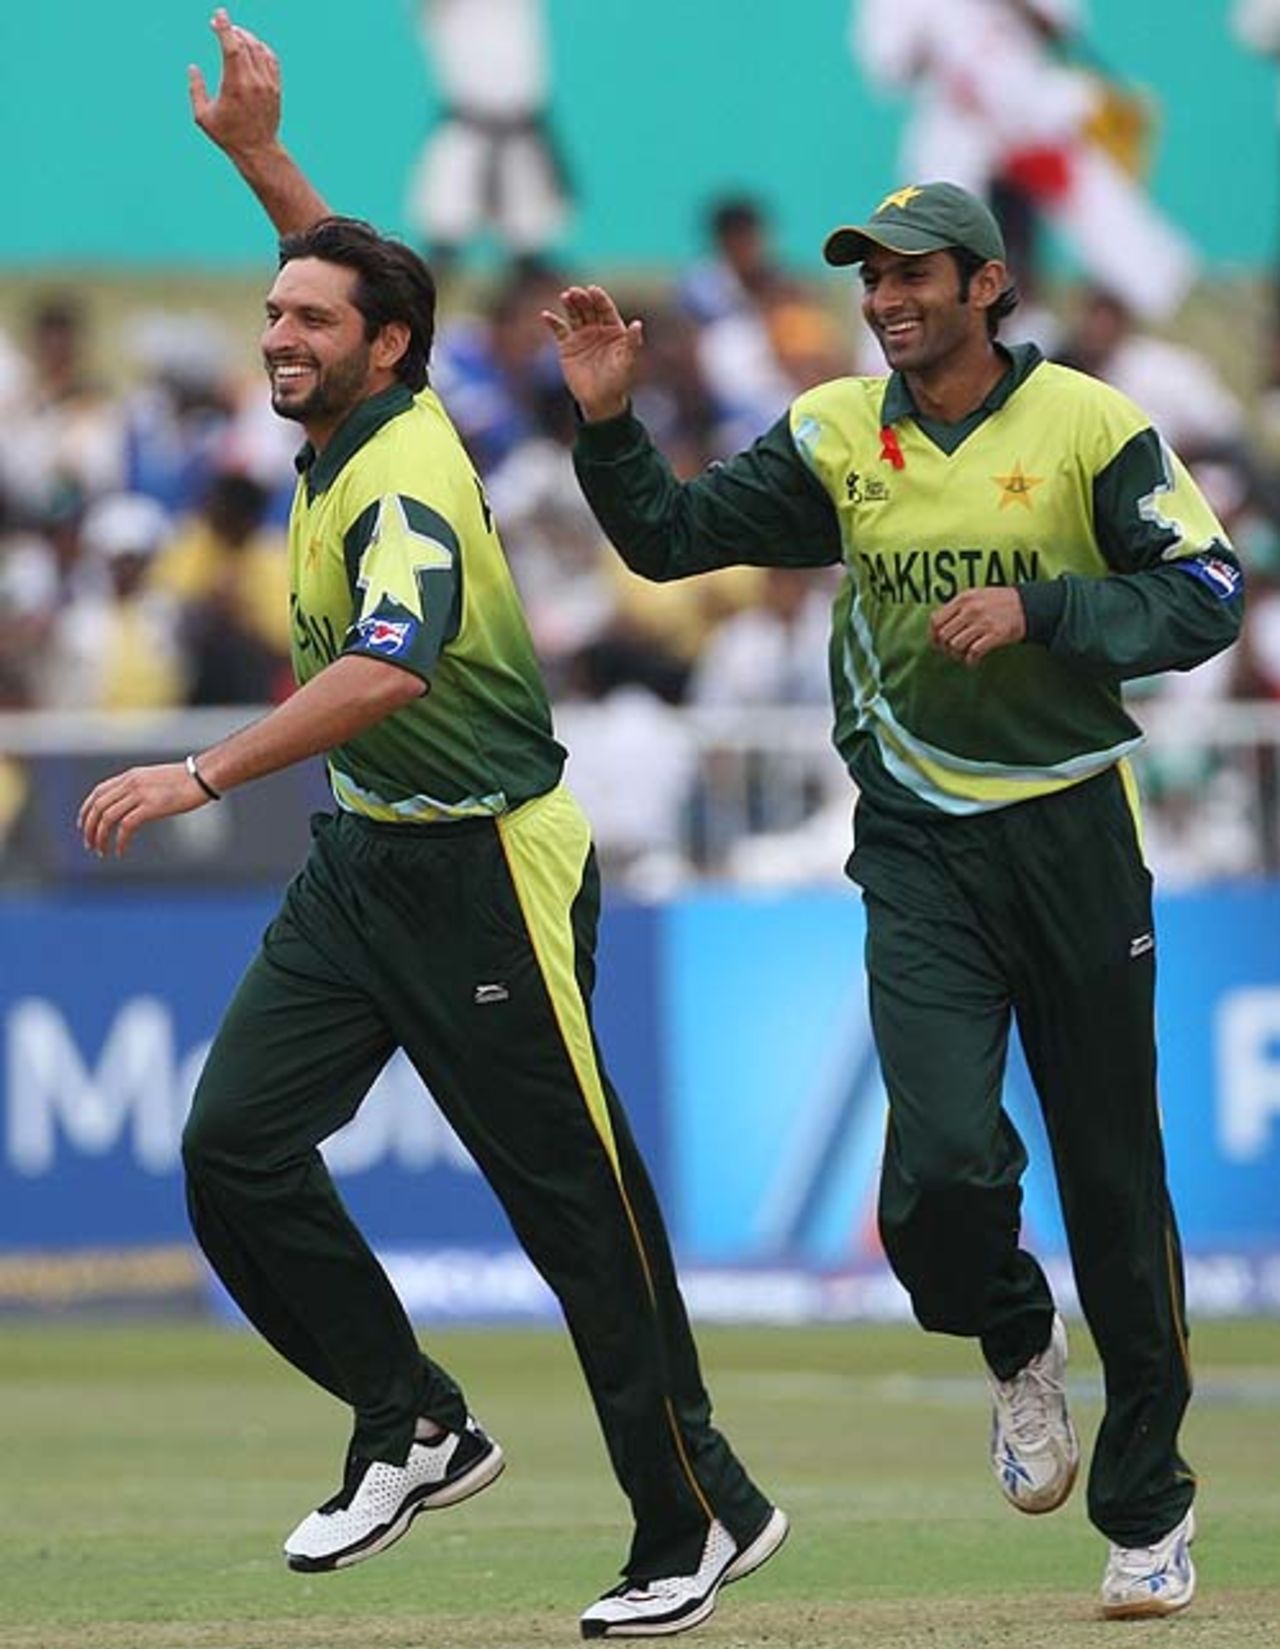 Shoaib Malik runs in to congratulate Shahid Afridi after he dismissed Dougie Brown, Group D, ICC World Twenty20, Durban, September 12, 2007